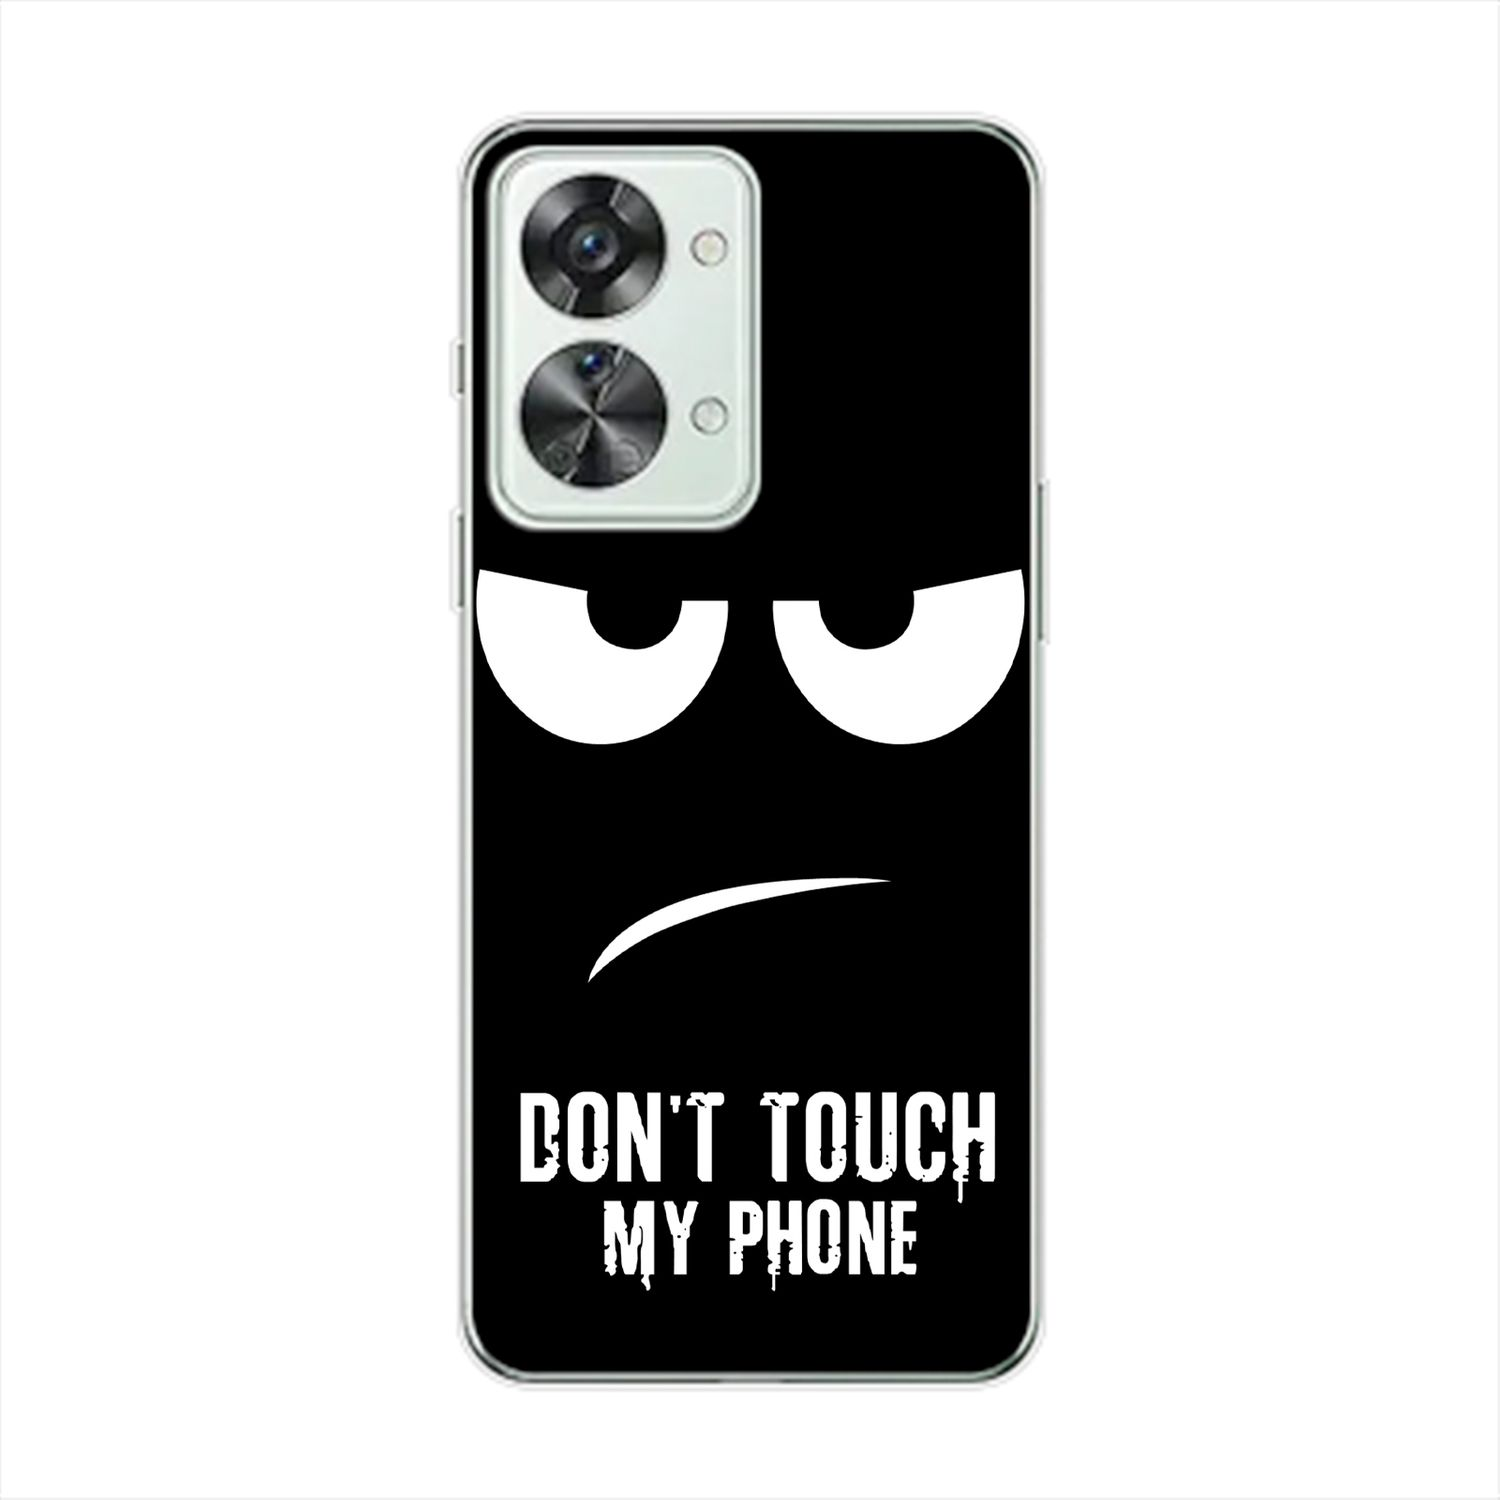 Backcover, DESIGN Dont OnePlus, Schwarz Phone Nord My Case, KÖNIG Touch 2T,